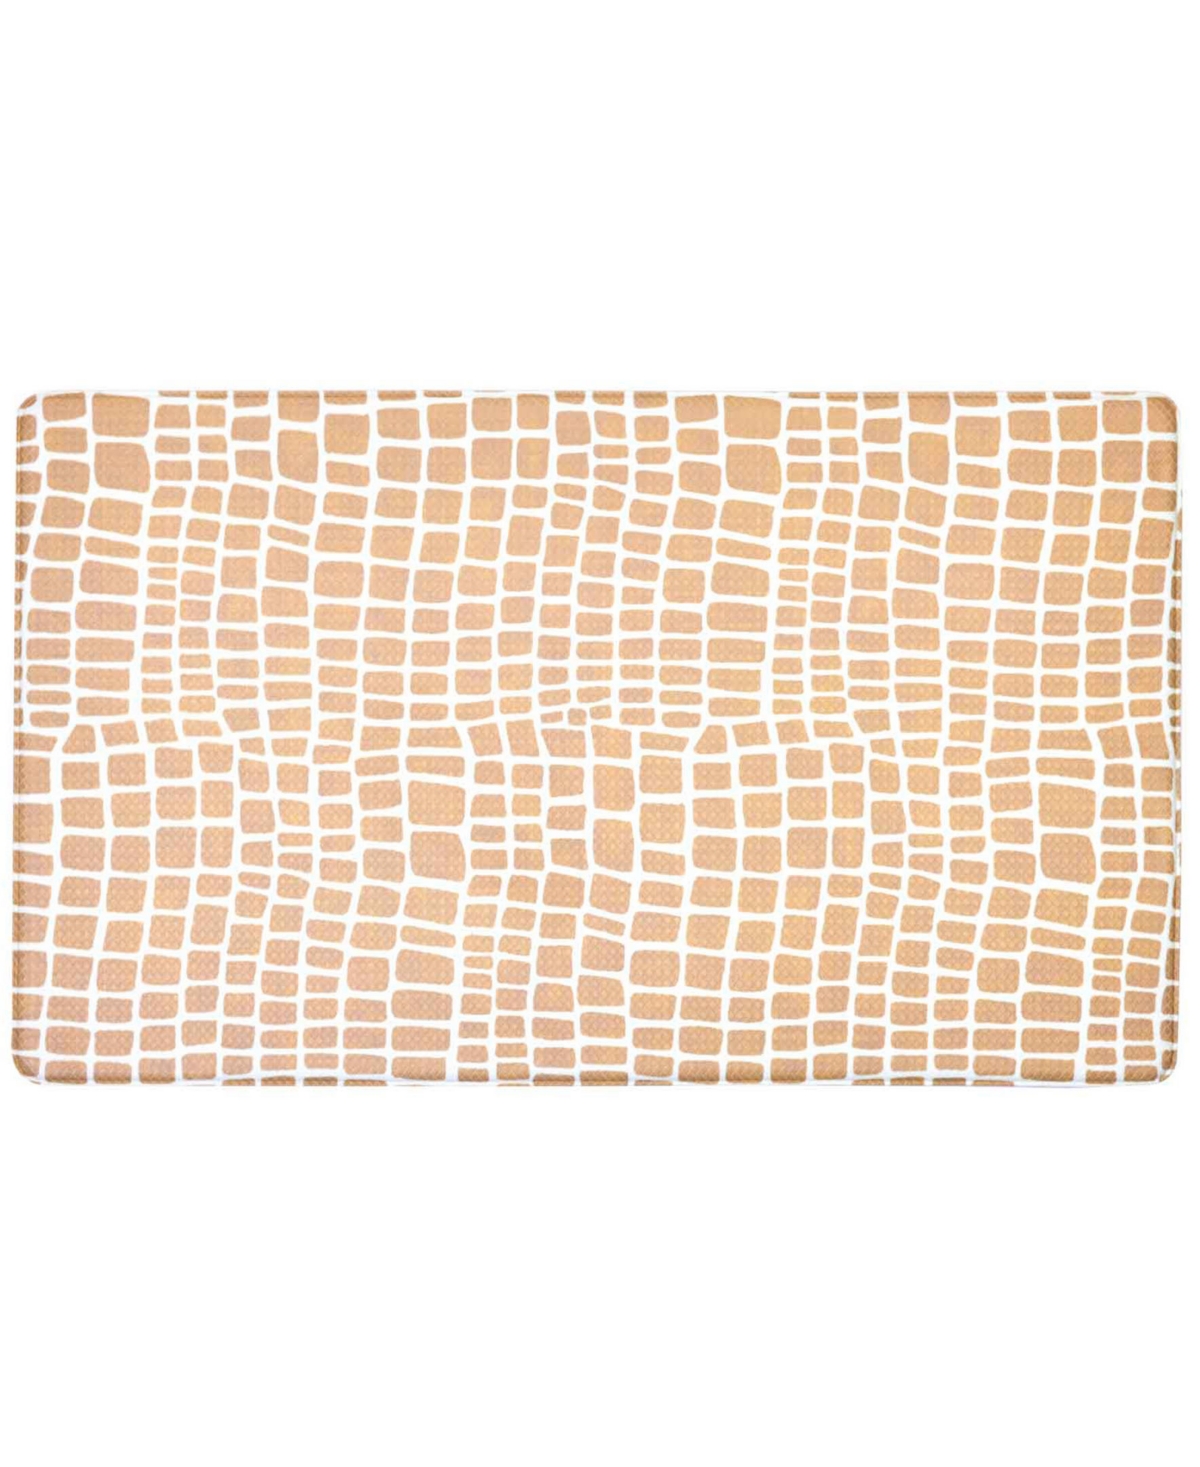 Tommy Bahama Printed Polyvinyl Chloride Fatigue-resistant Mat, 20" X 36" In Crocodile Beige